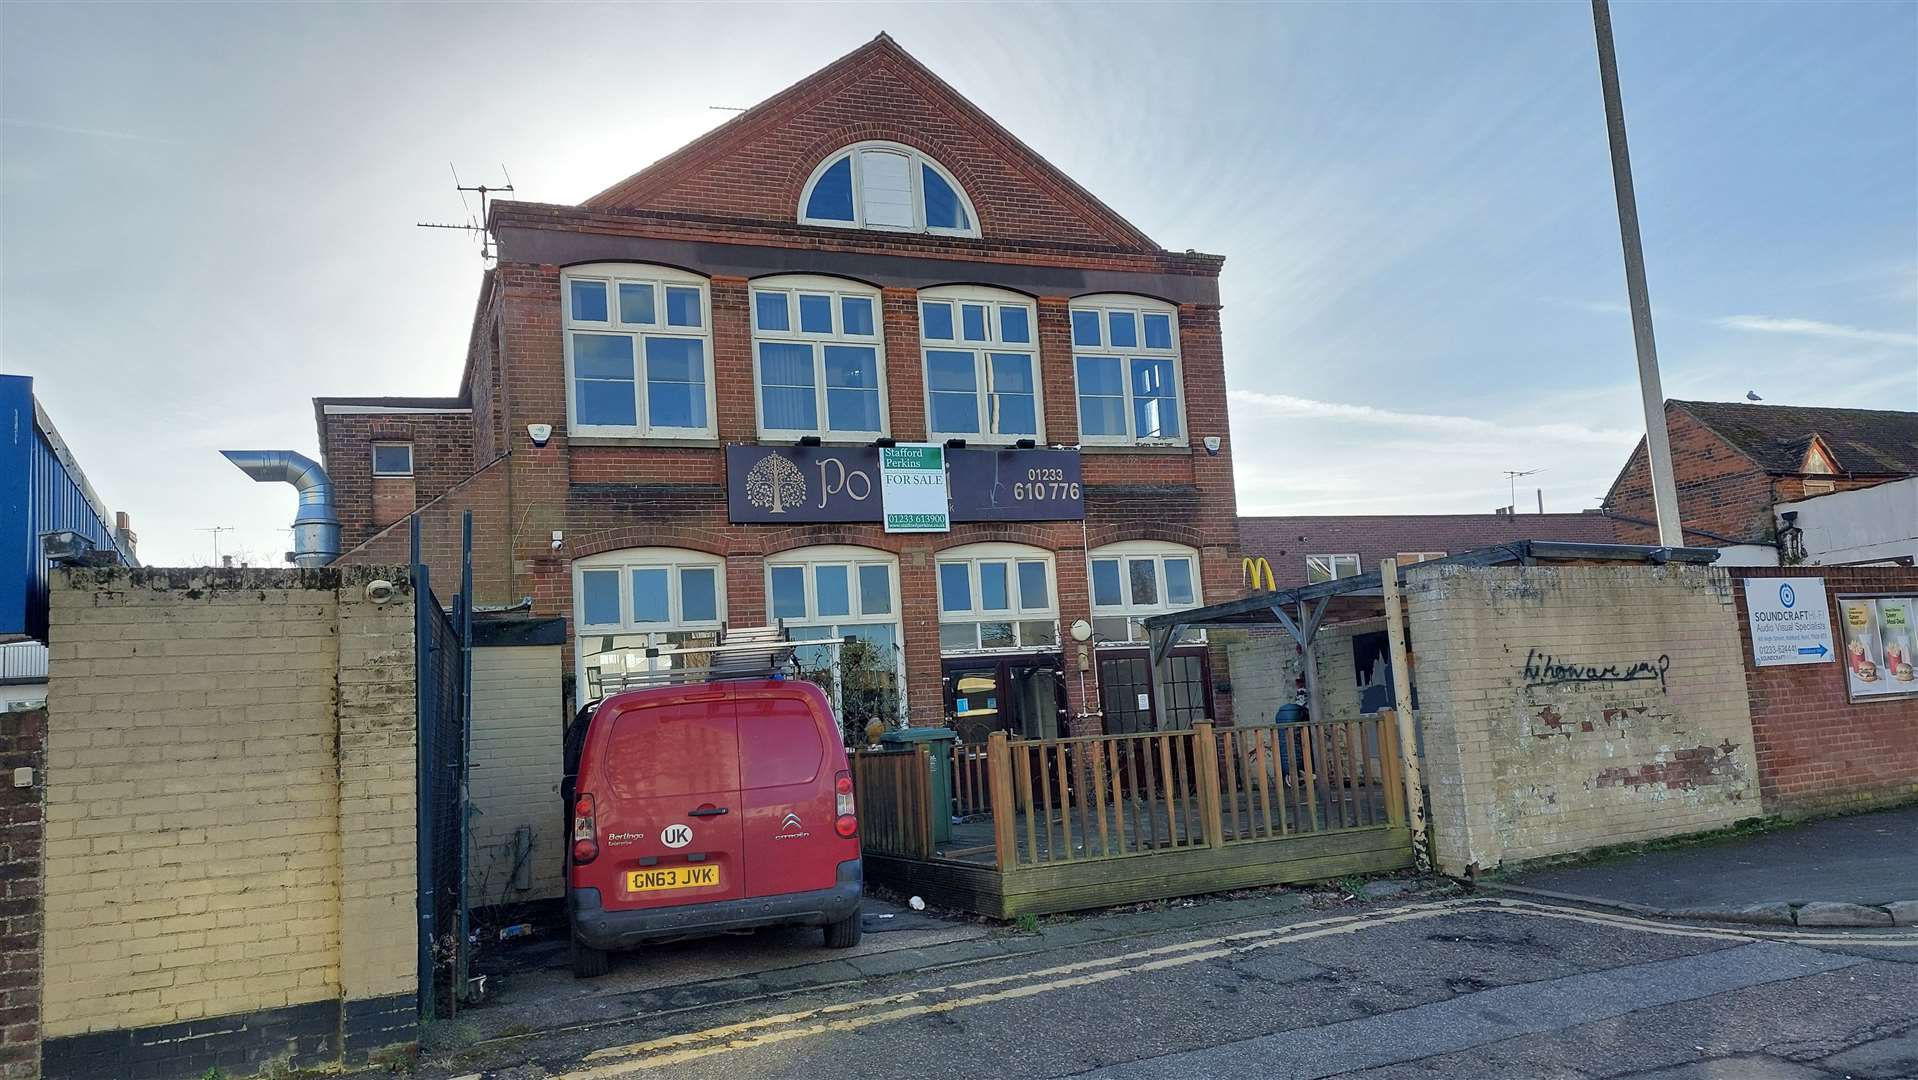 The team behind the proposed DJB Nightclub want to open it in the former Po Thai and Downtown Diner unit in Ashford town centre